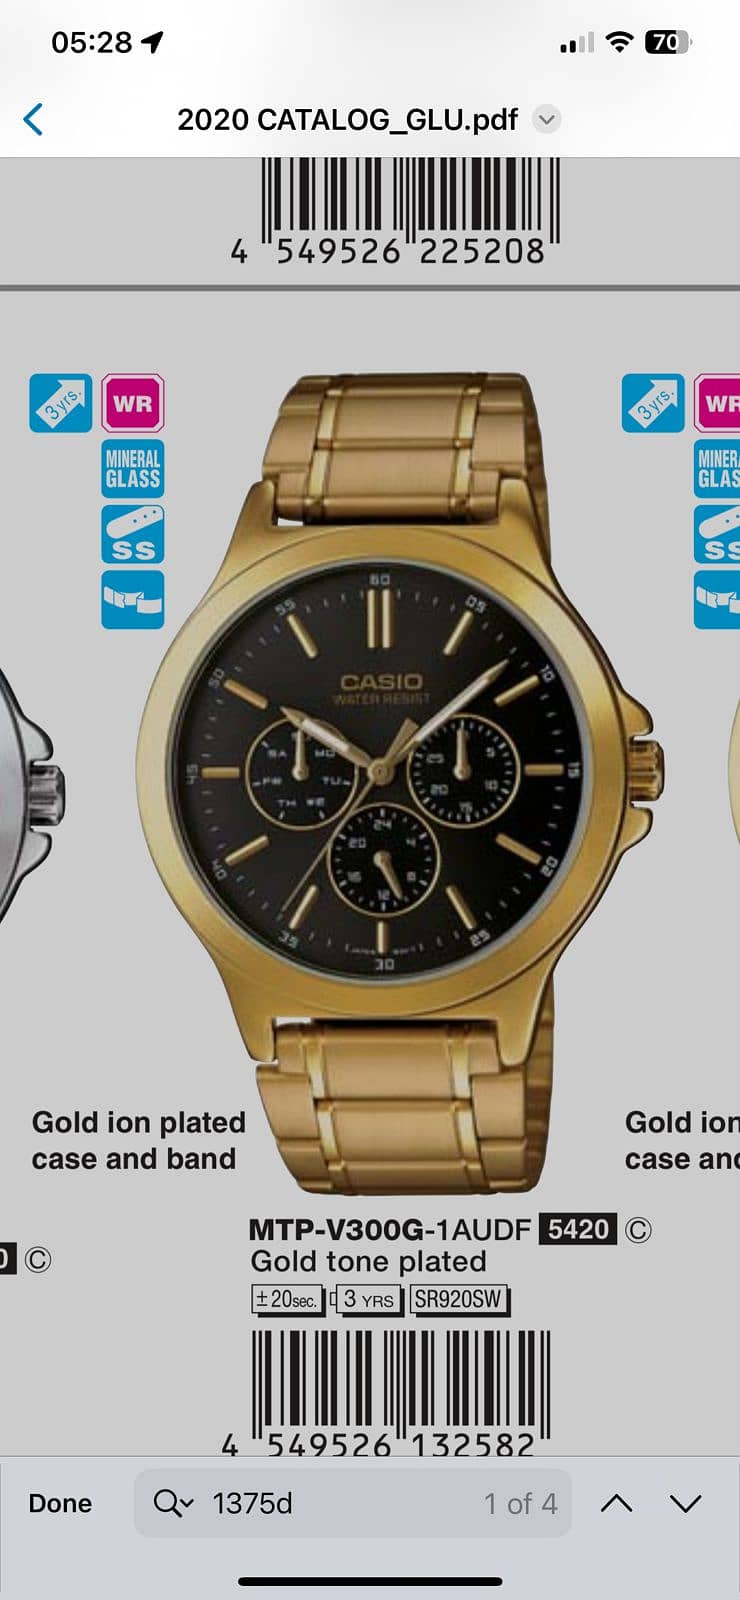 Casio watches on discounted prices 2